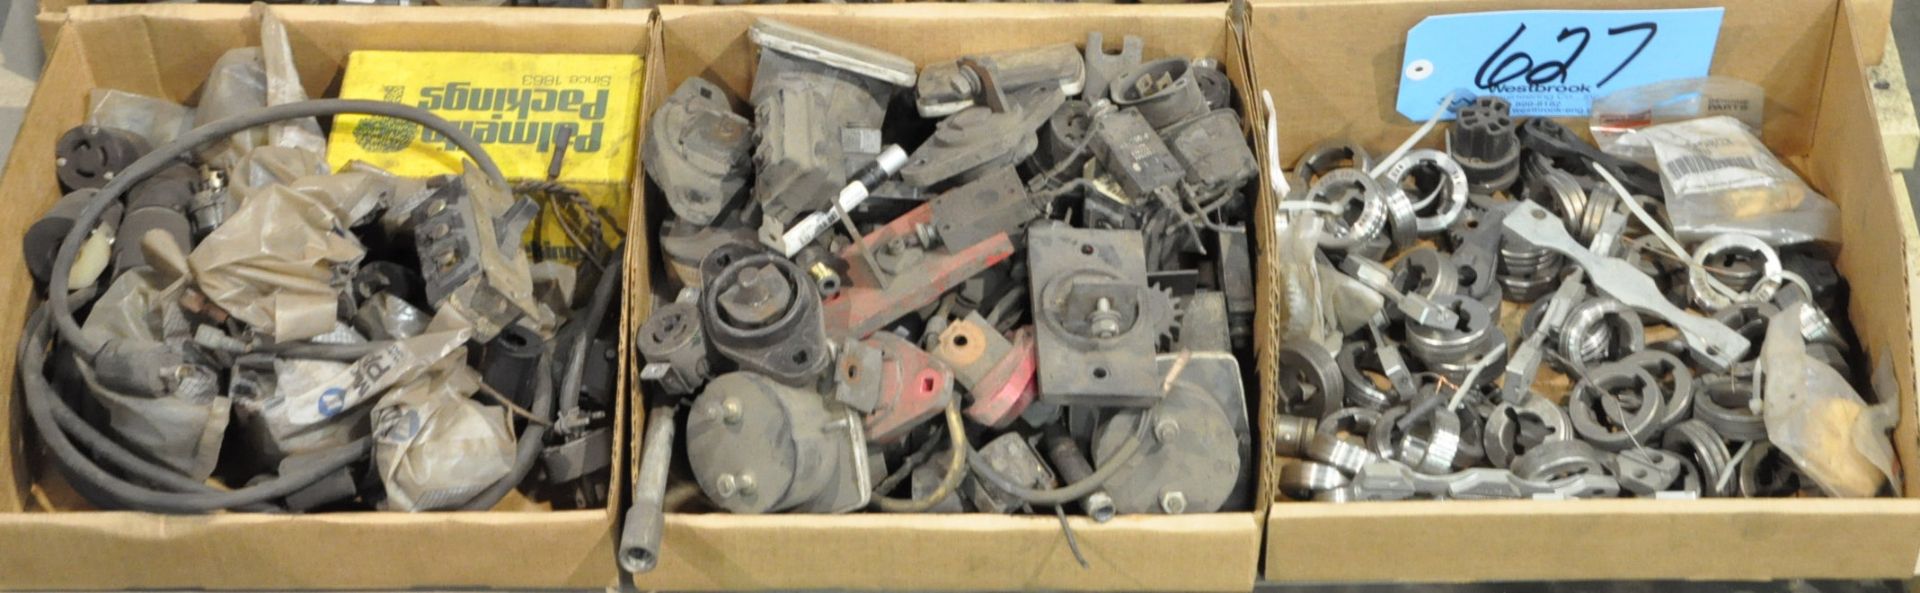 Lot-Welding Maintenance Parts in (3) Boxes